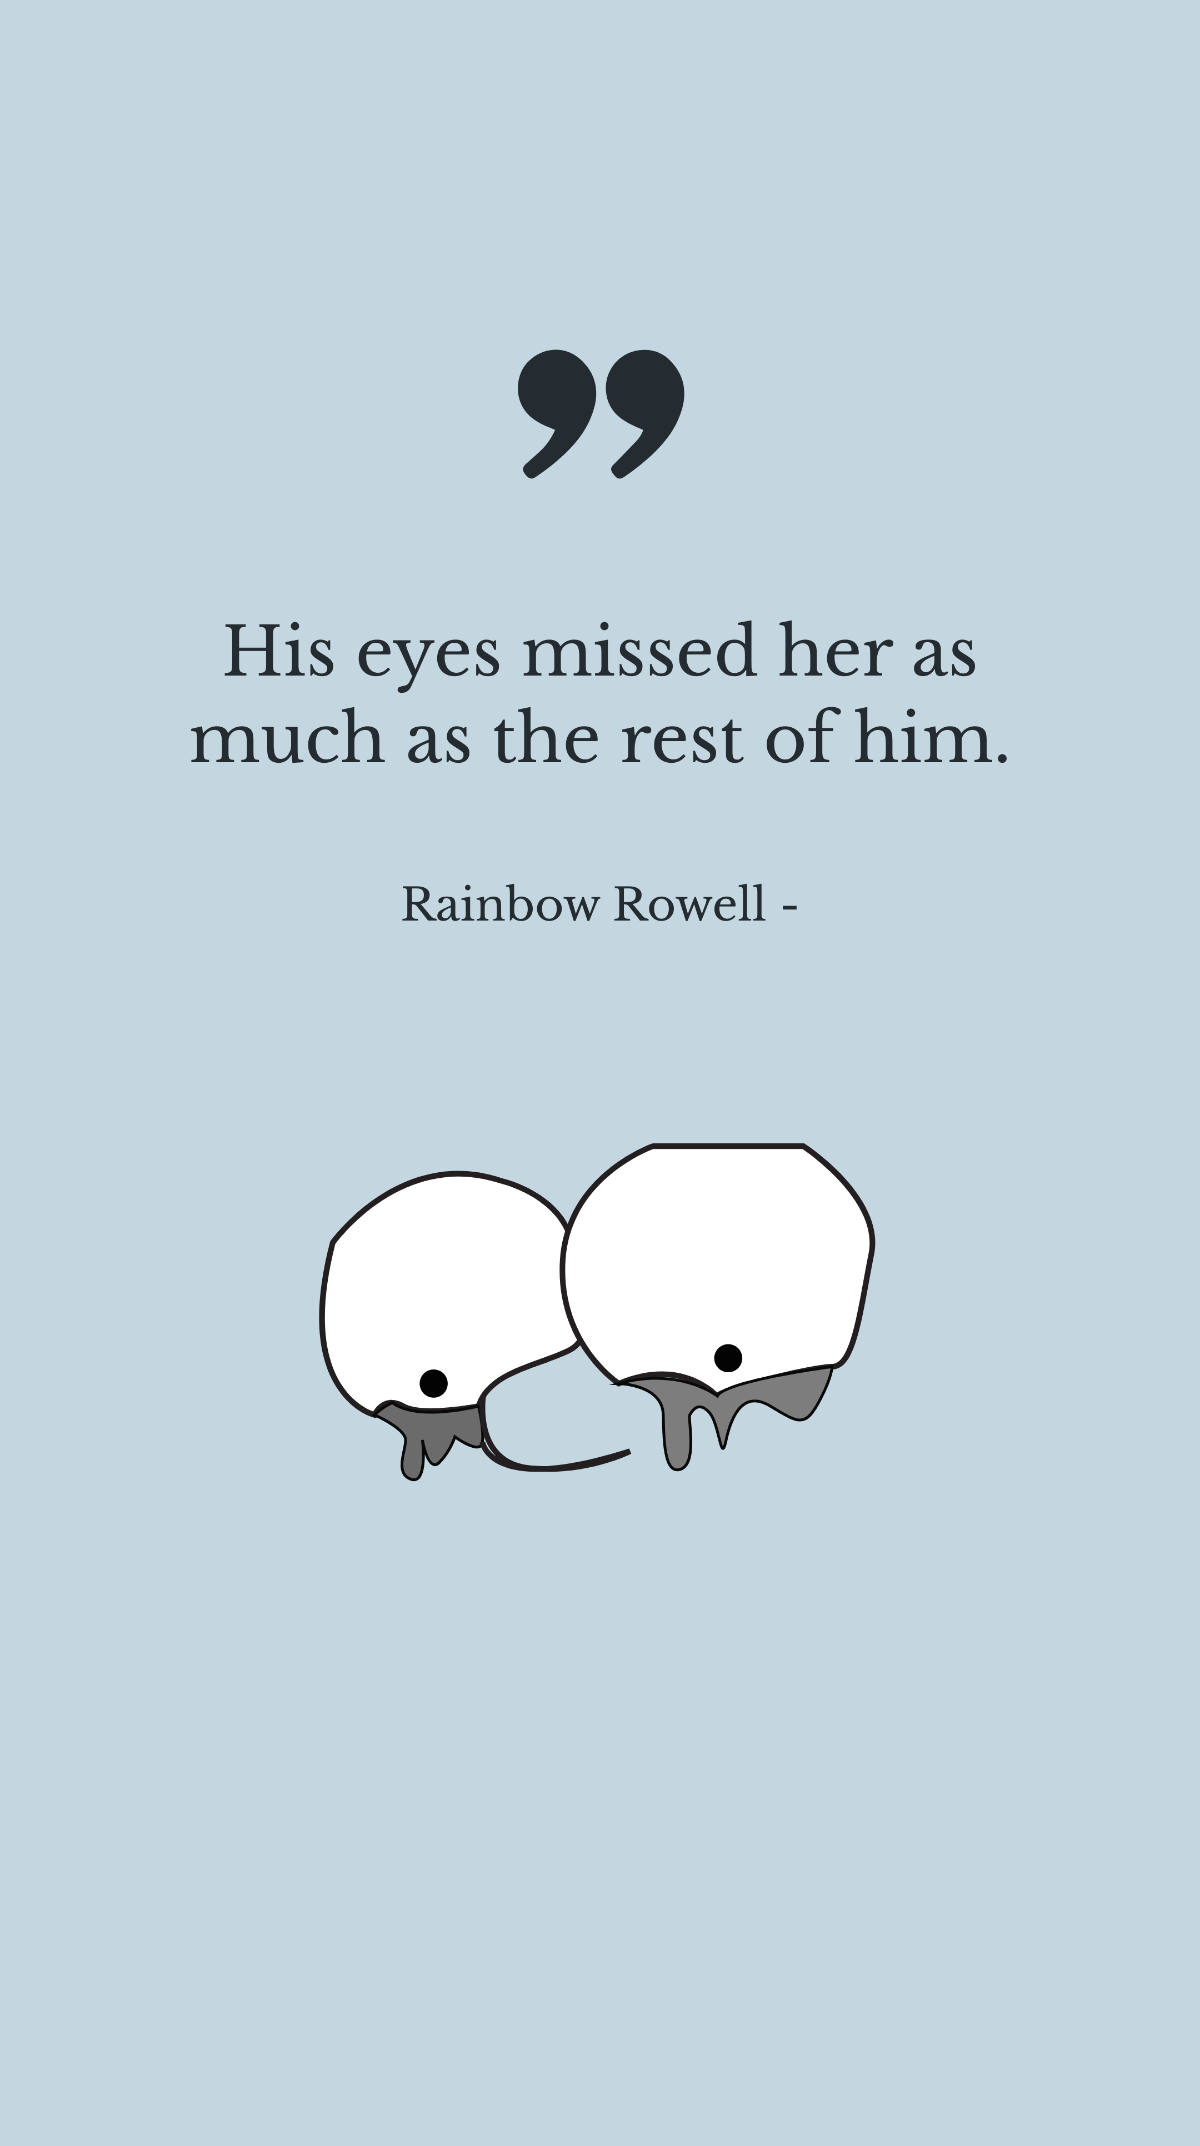 Rainbow Rowell - His eyes missed her as much as the rest of him. Template